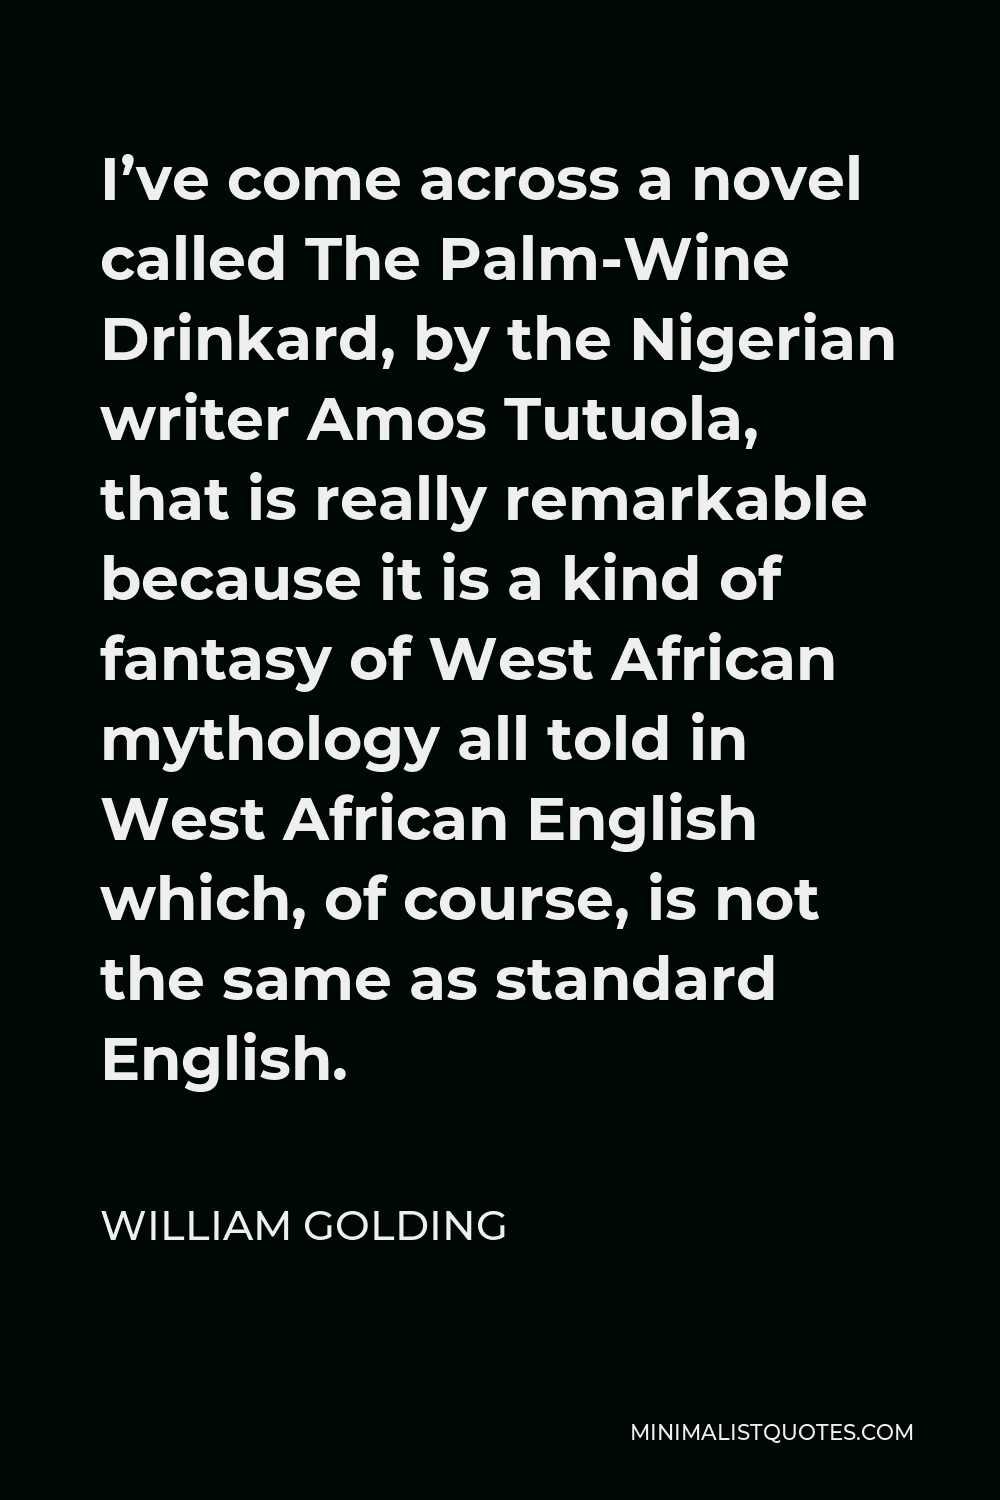 William Golding Quote - I’ve come across a novel called The Palm-Wine Drinkard, by the Nigerian writer Amos Tutuola, that is really remarkable because it is a kind of fantasy of West African mythology all told in West African English which, of course, is not the same as standard English.